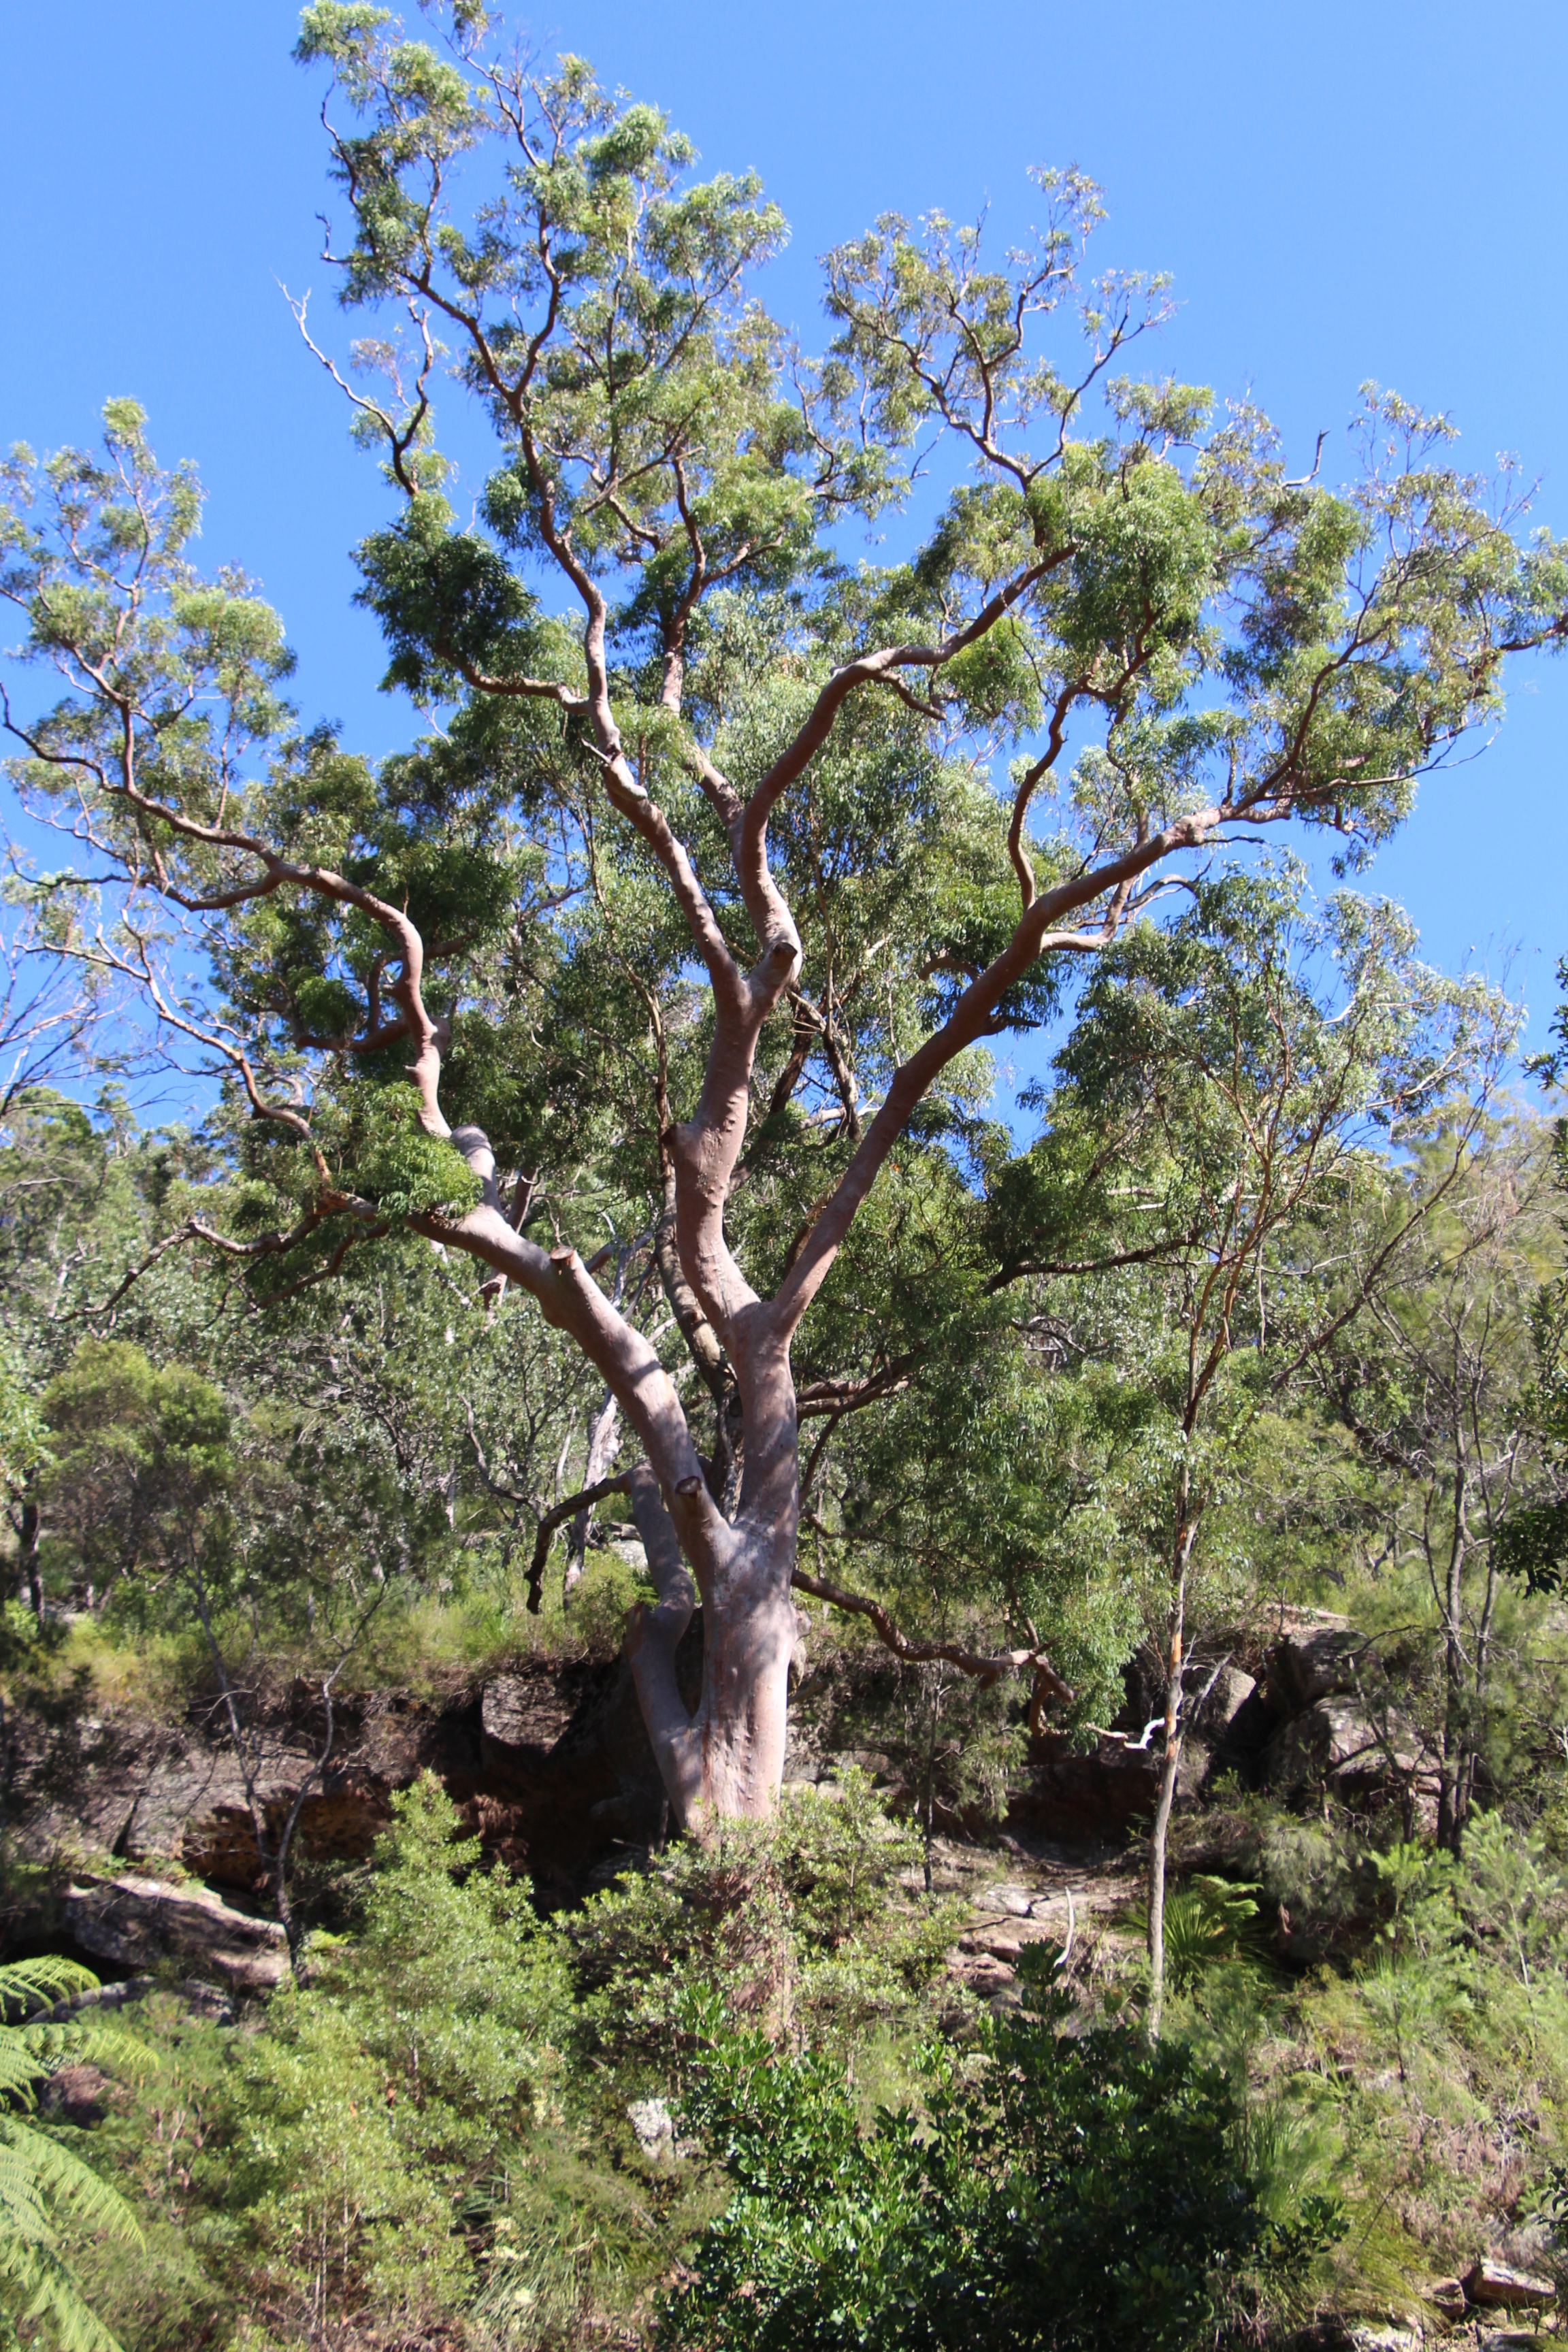 large gum tree among other bushes and trees